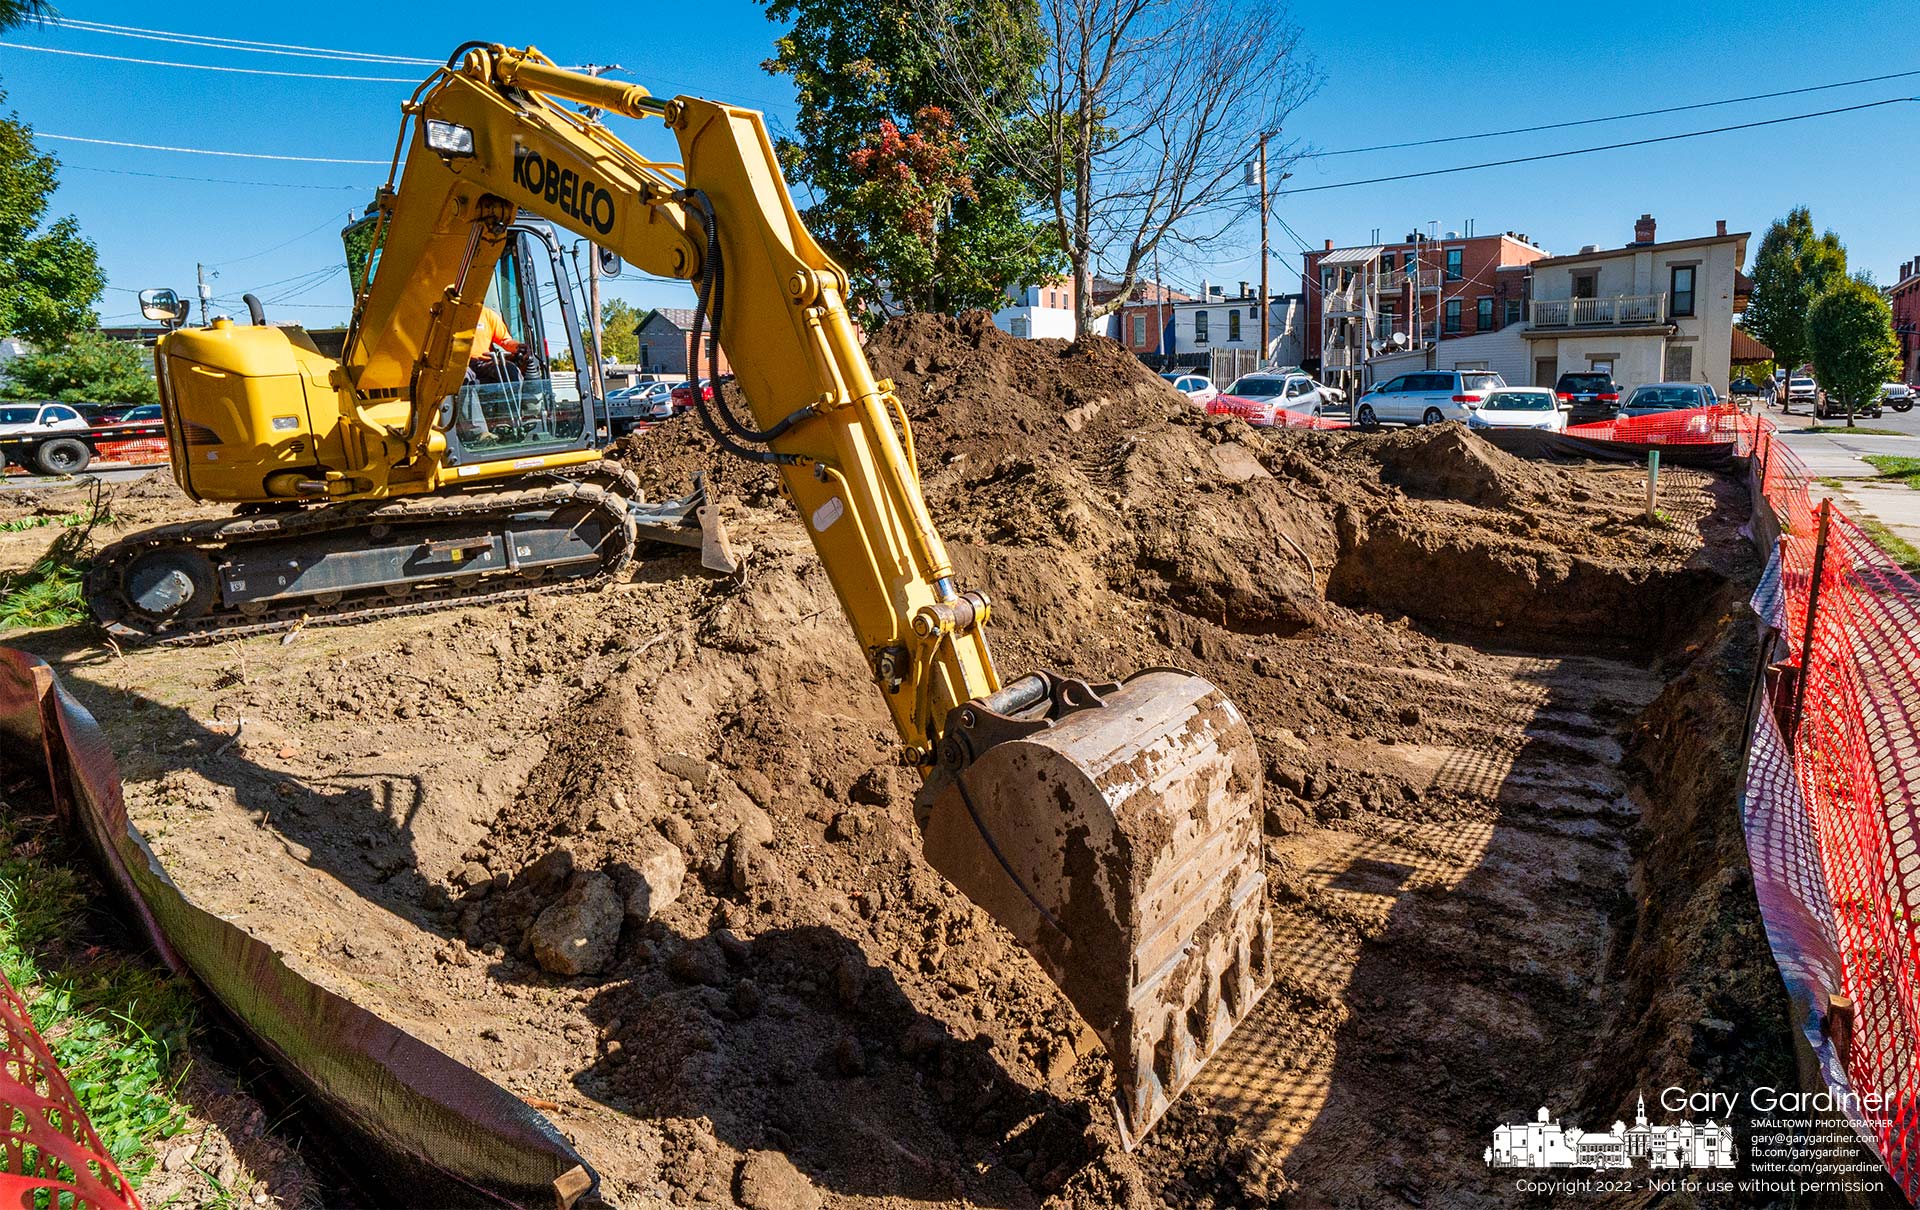 A contractor uses a backhoe to clear dirt from beneath where the Book Harbor bookstore stood to prepare for a new foundation as the property is converted to a multiple-story business and office building. My Final Photo for October 3, 2022.